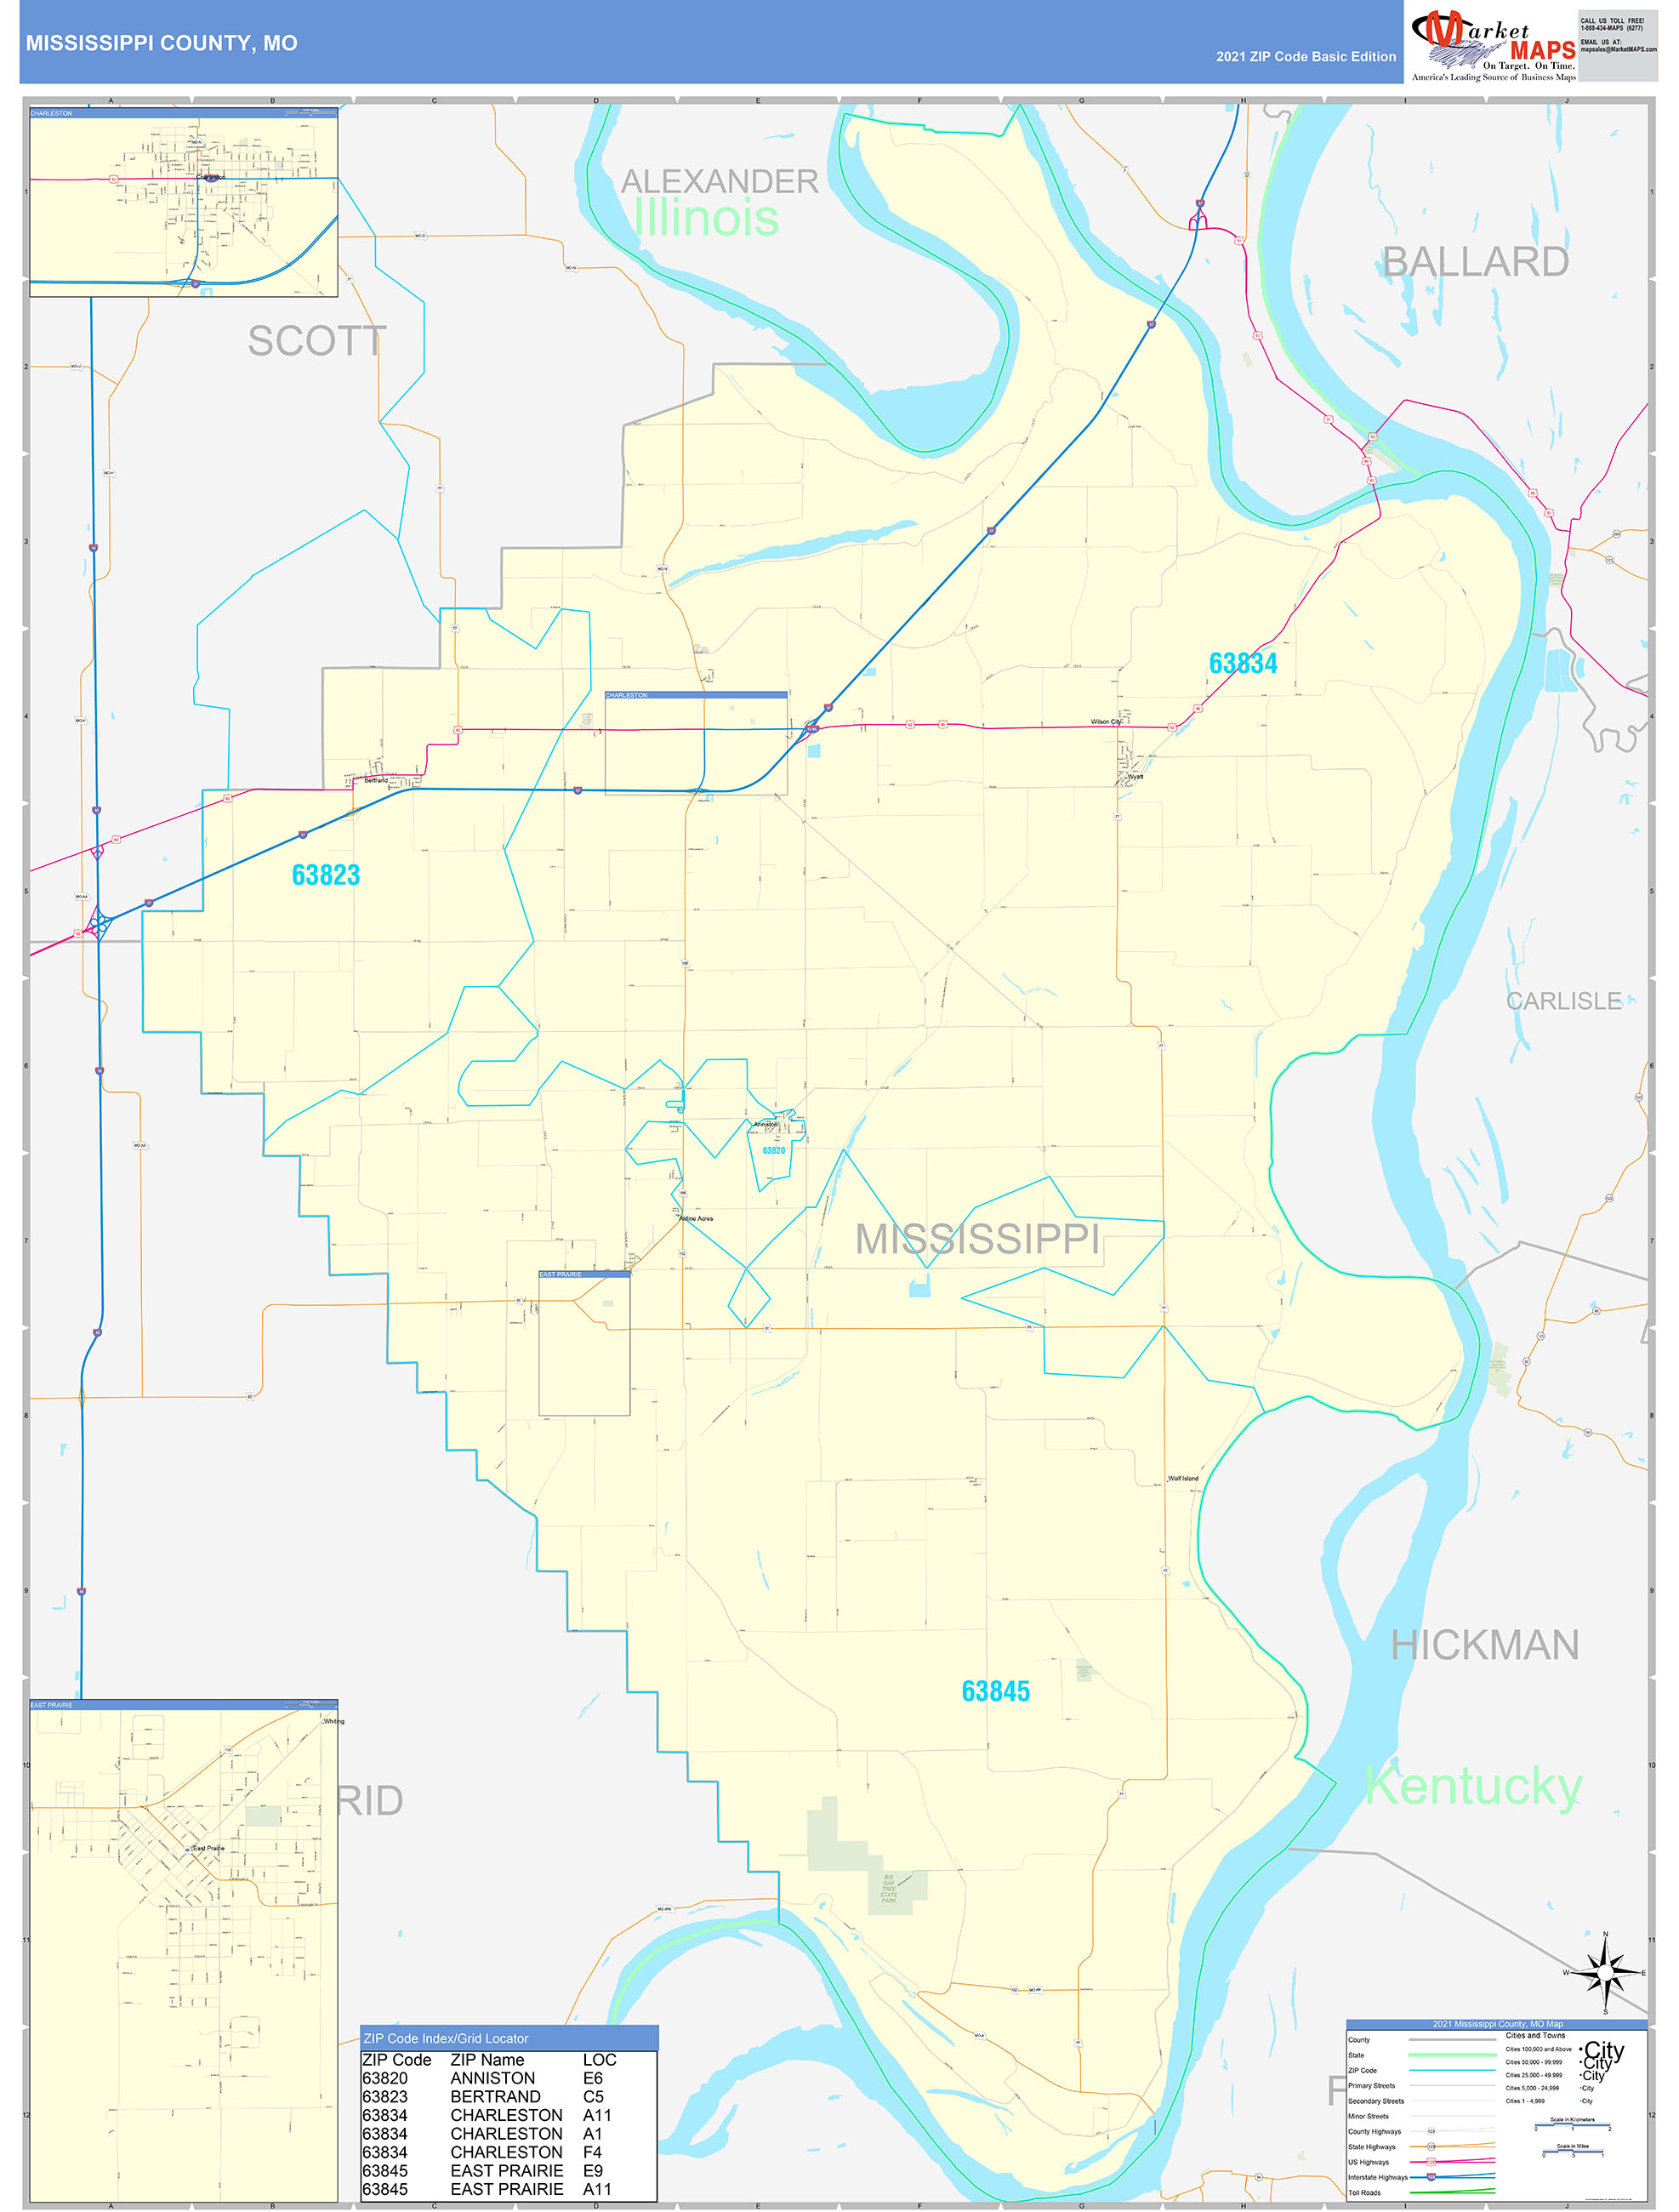 Mississippi County, MO Zip Code Wall Map Basic Style by MarketMAPS